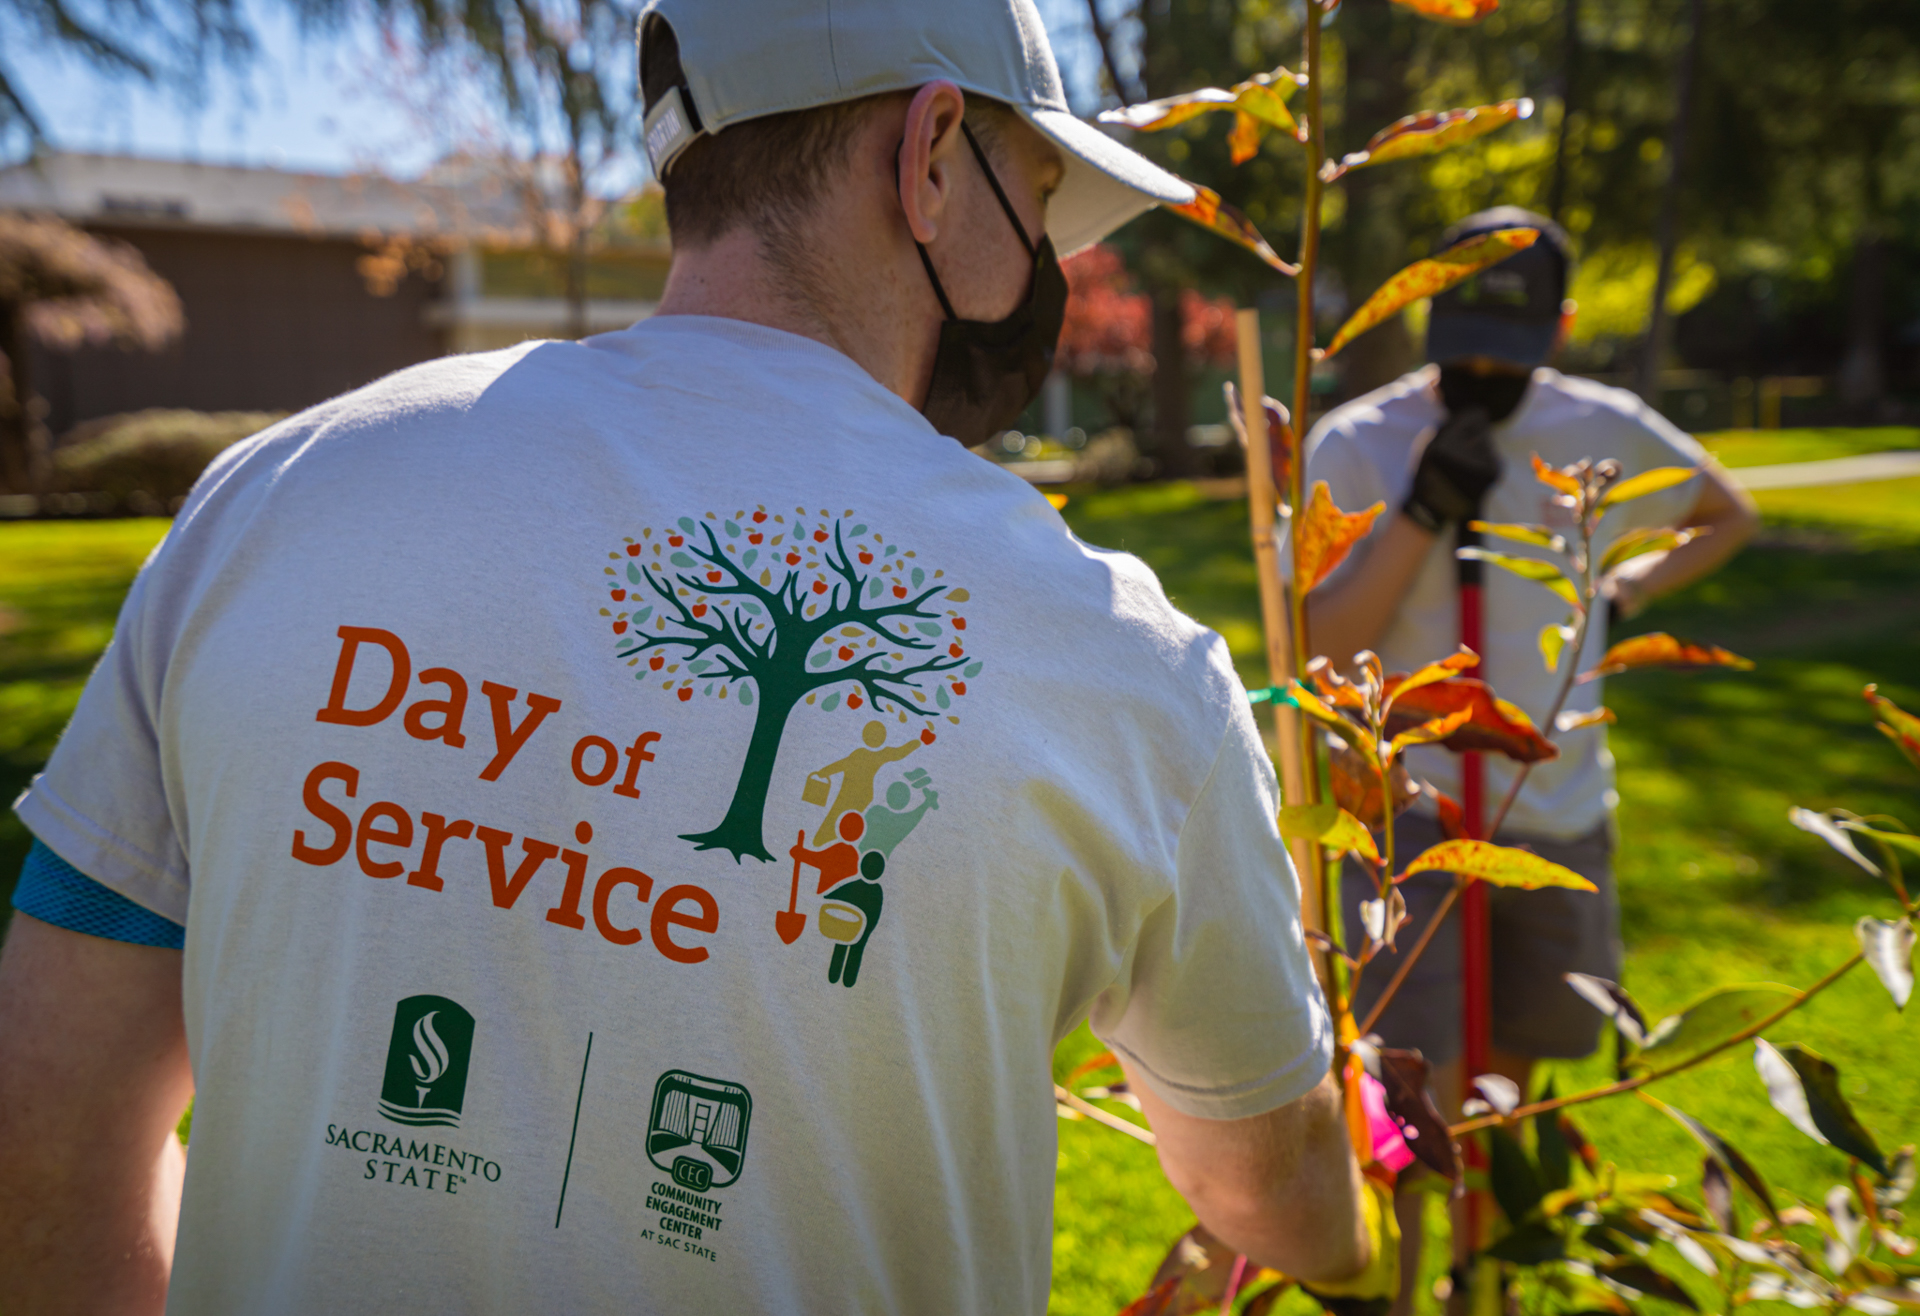 Day of Service shirt